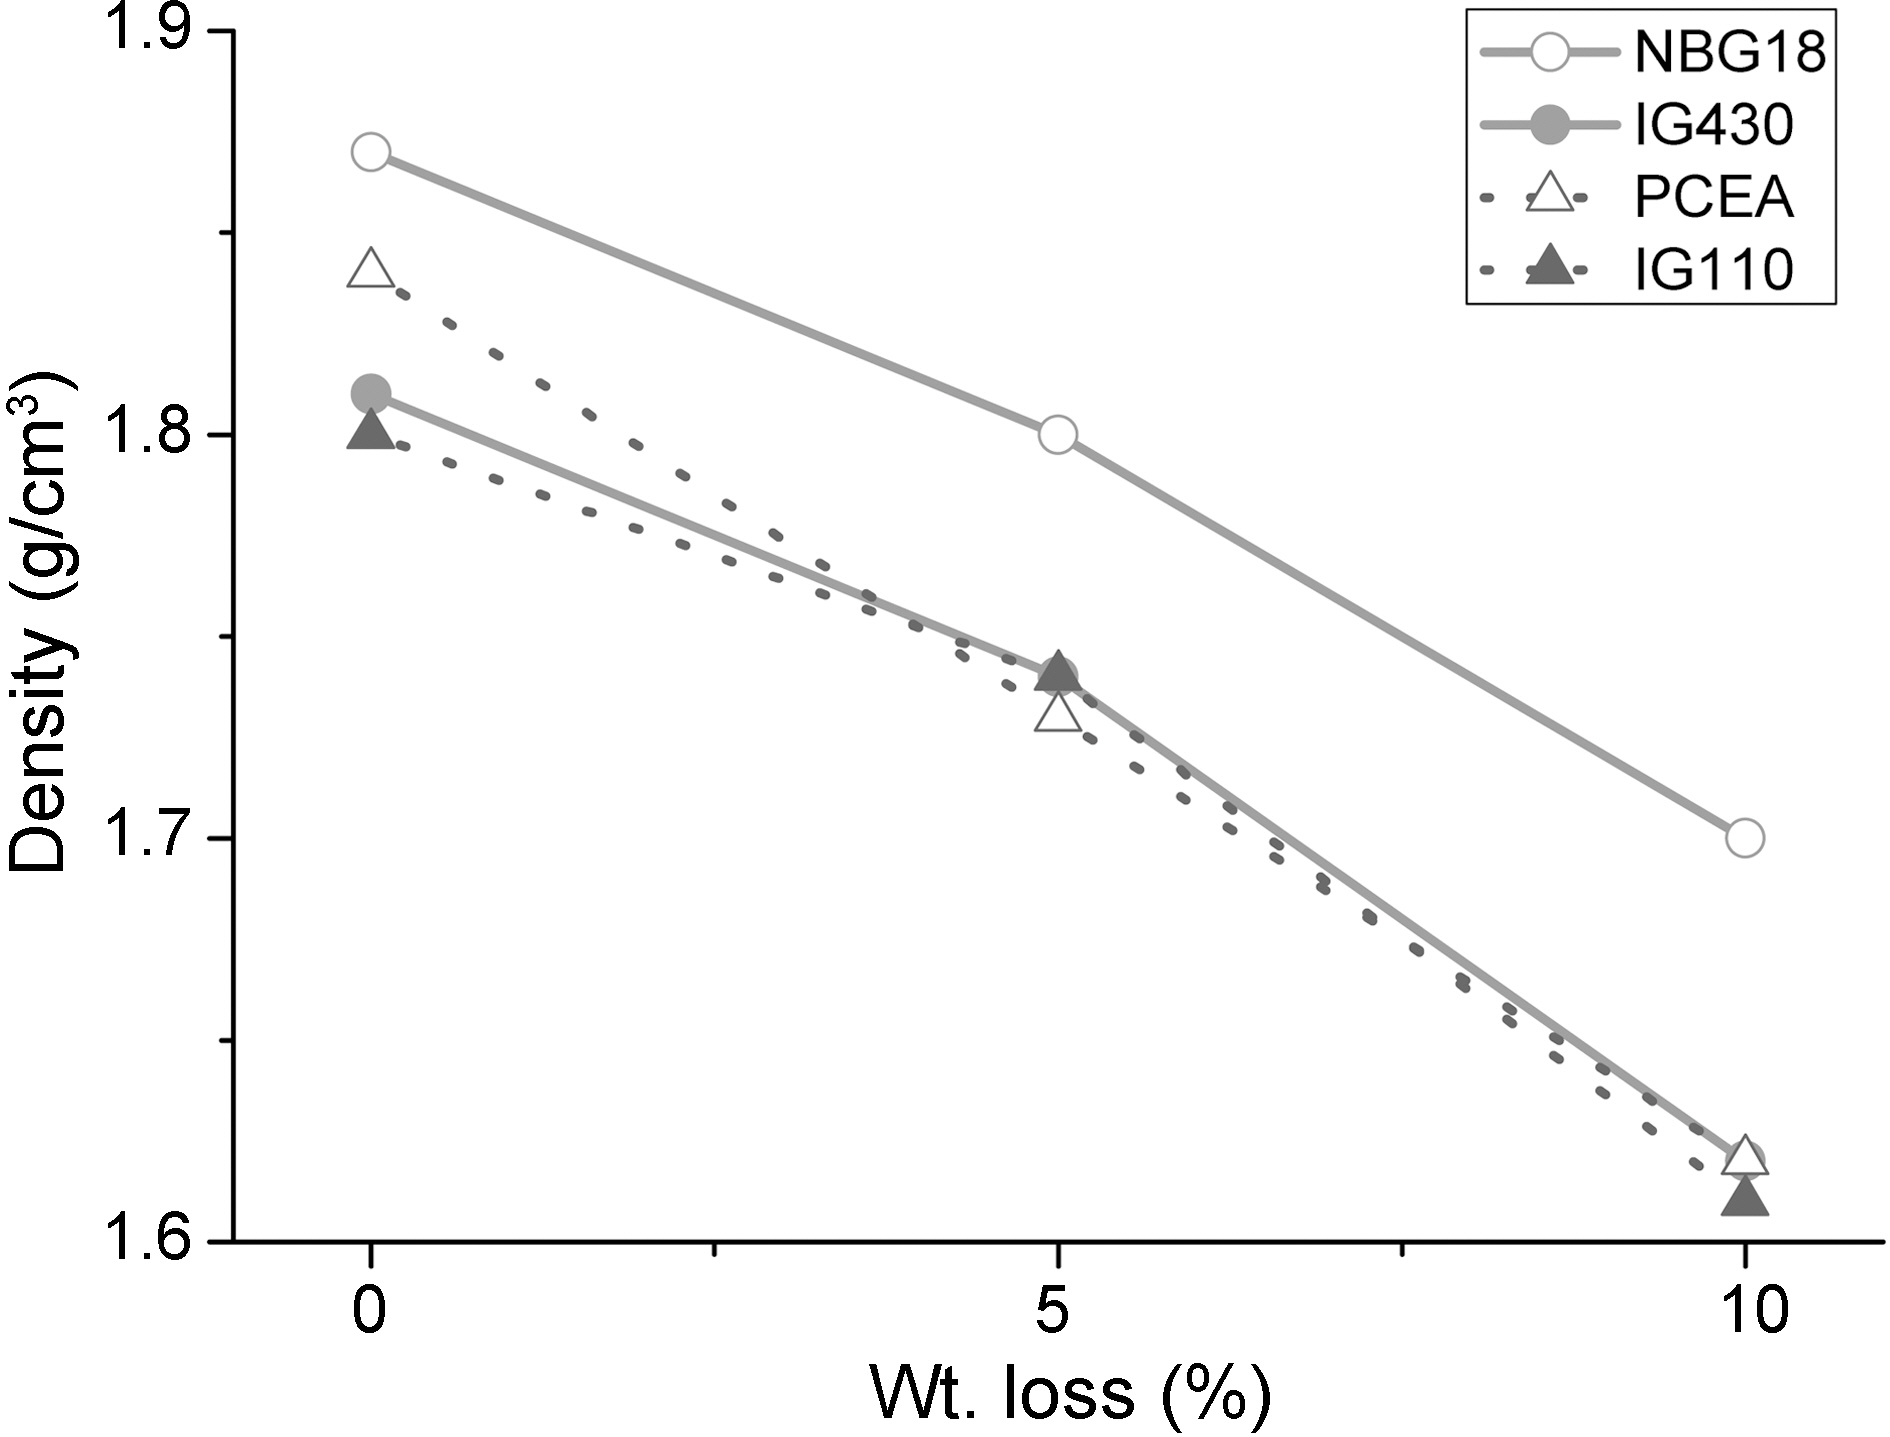 The density changes as a function of weight losses.